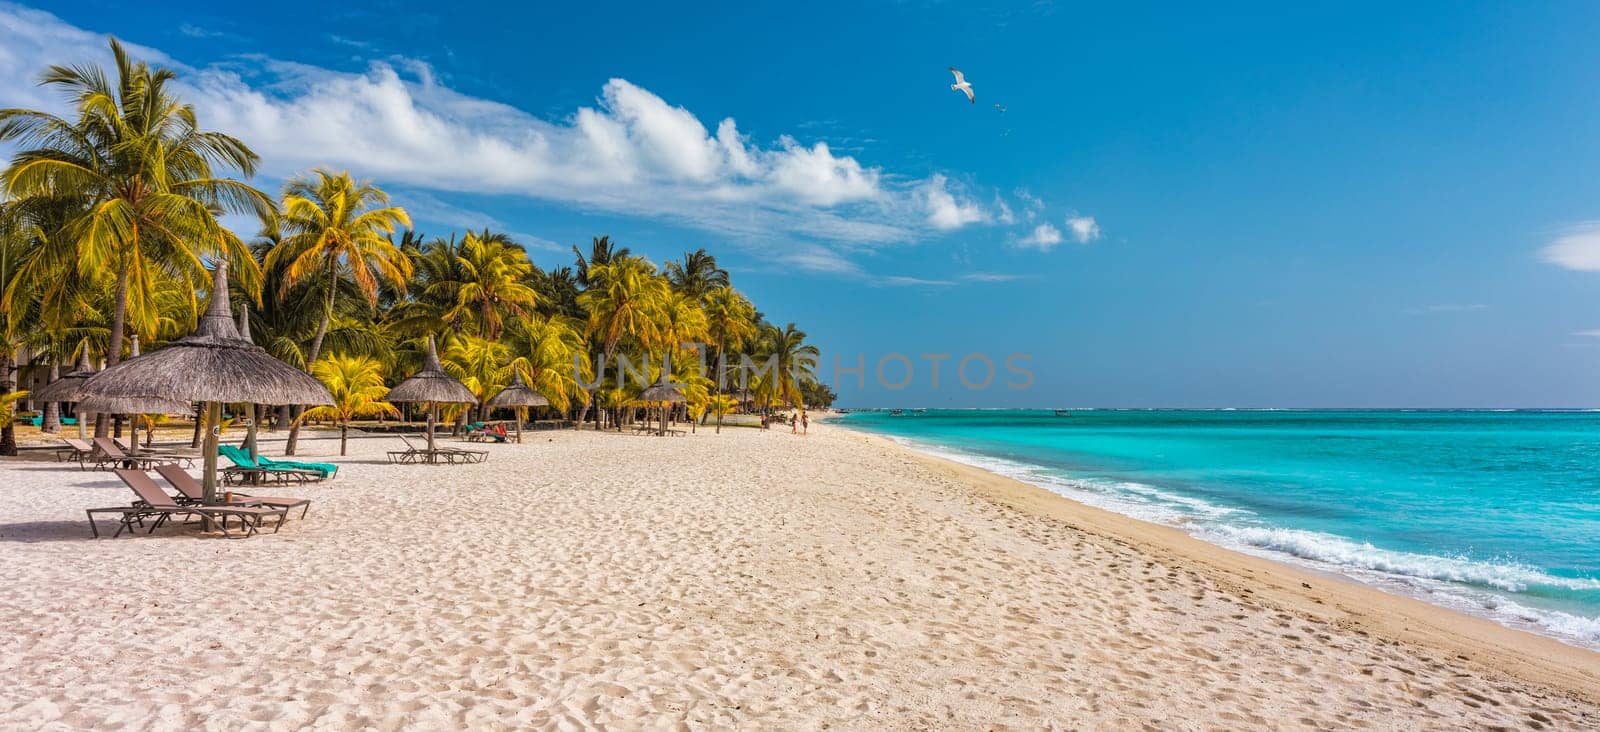 Paradise beach resort with palm trees and and tropical sea in Mauritius island. Summer vacation and tropical beach concept. Sandy beach with Le Morne beach on Mauritius island. Tropical landscape.